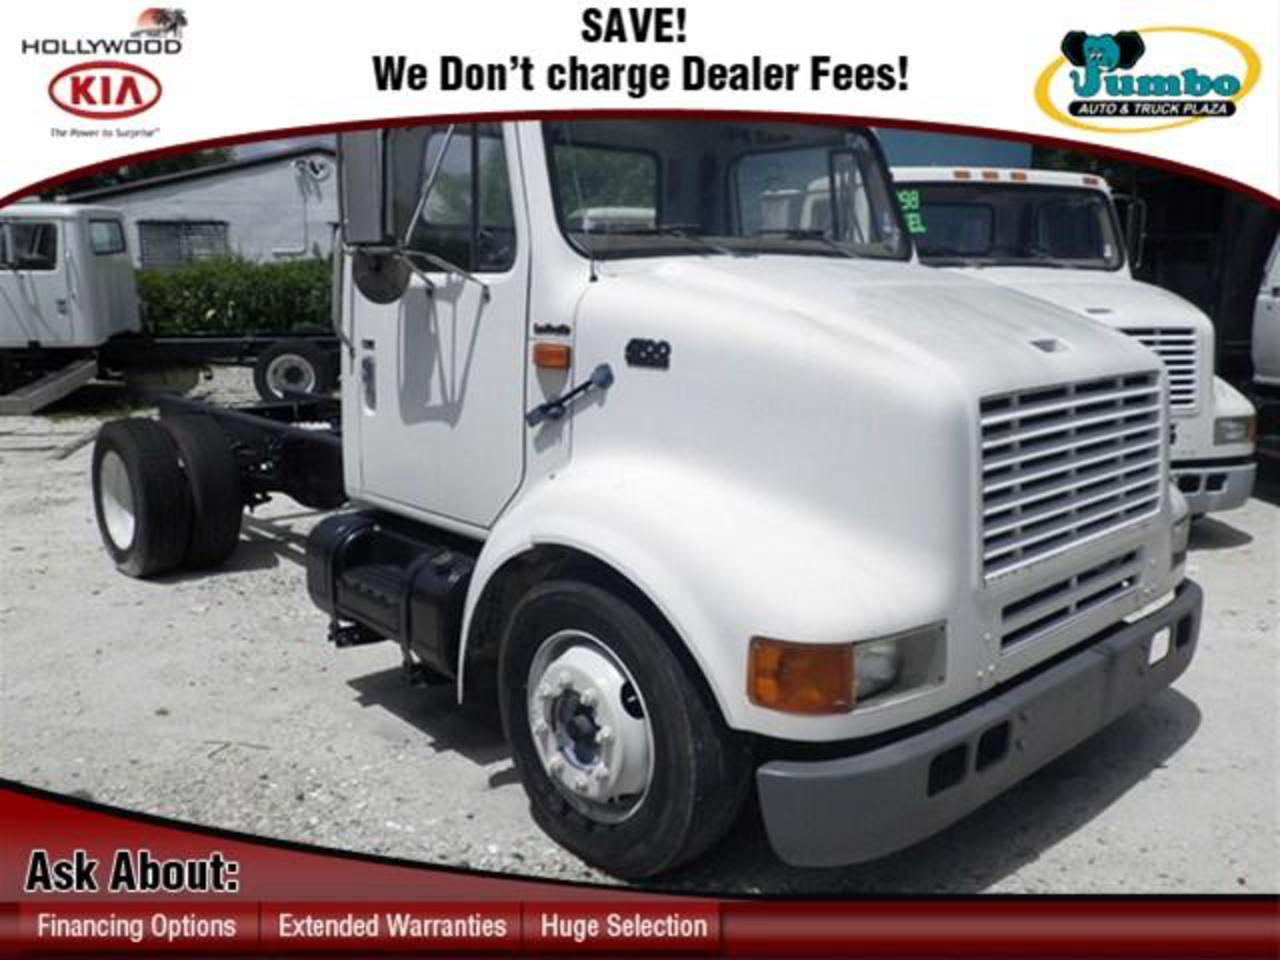 1998 International 4500/4700 LPX, Used Cars For Sale - Carsforsale.